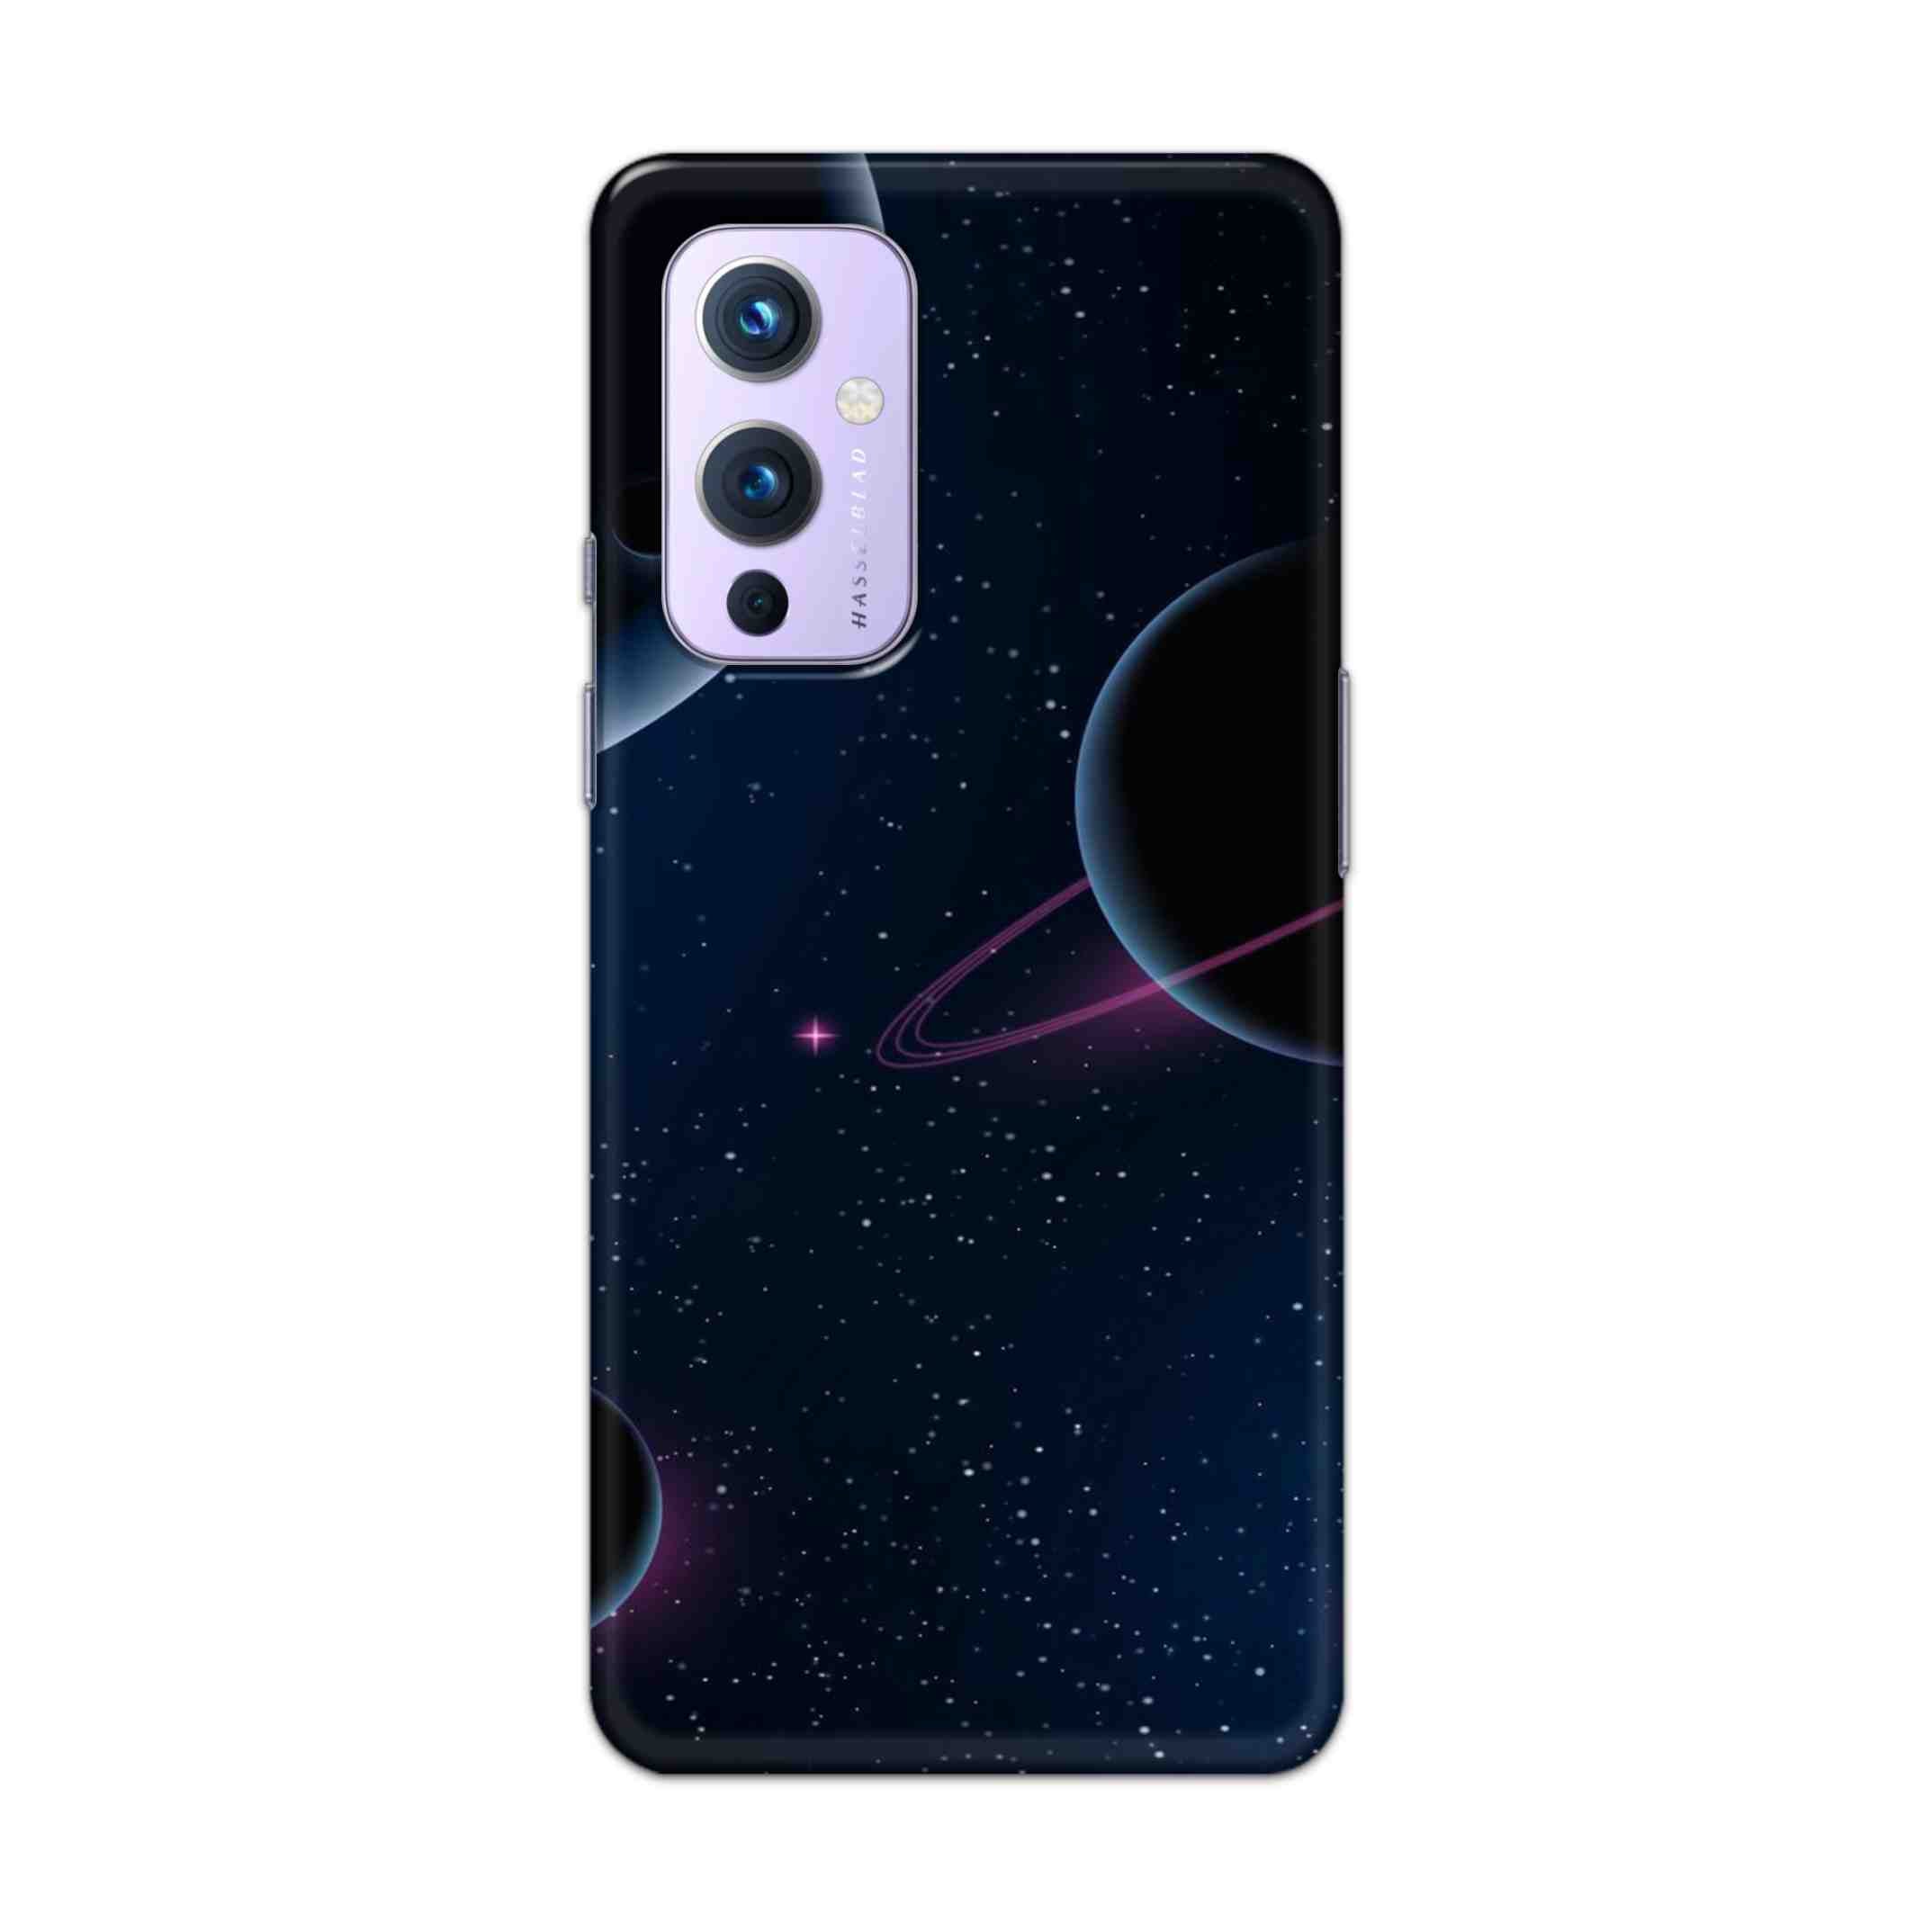 Buy Night Space Hard Back Mobile Phone Case Cover For OnePlus 9 Online